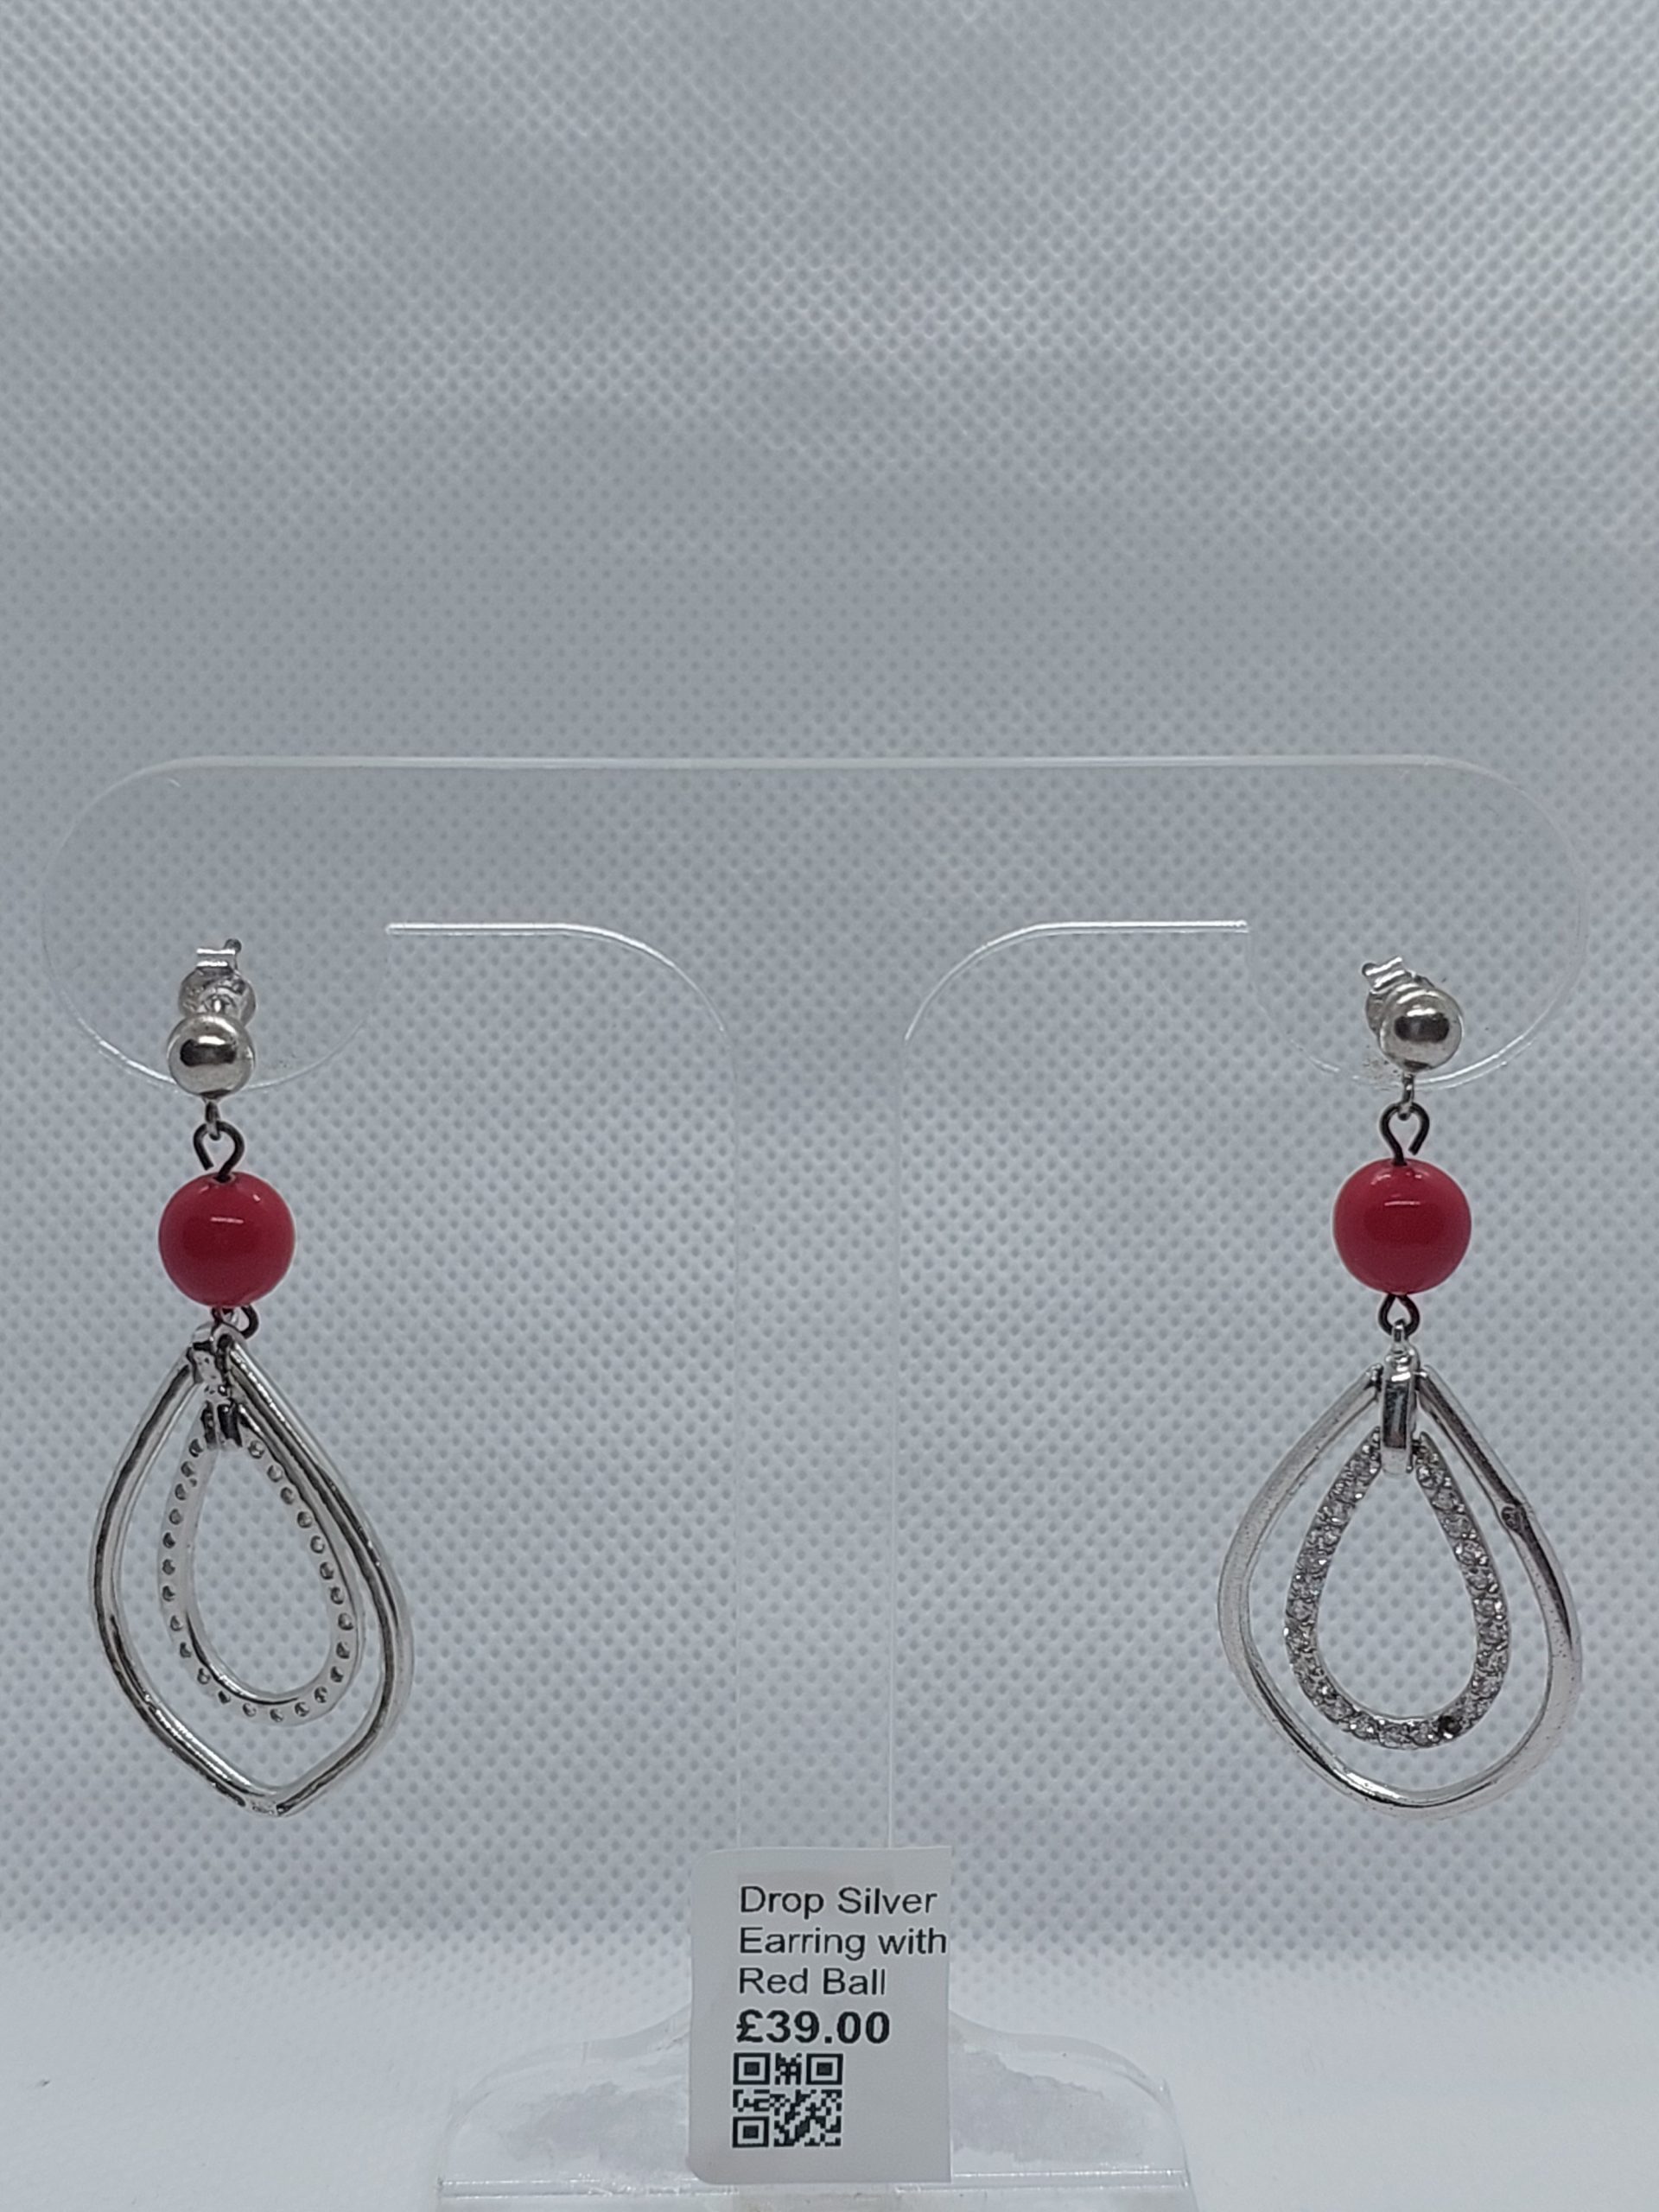 Drop Silver Earring with Red Ball